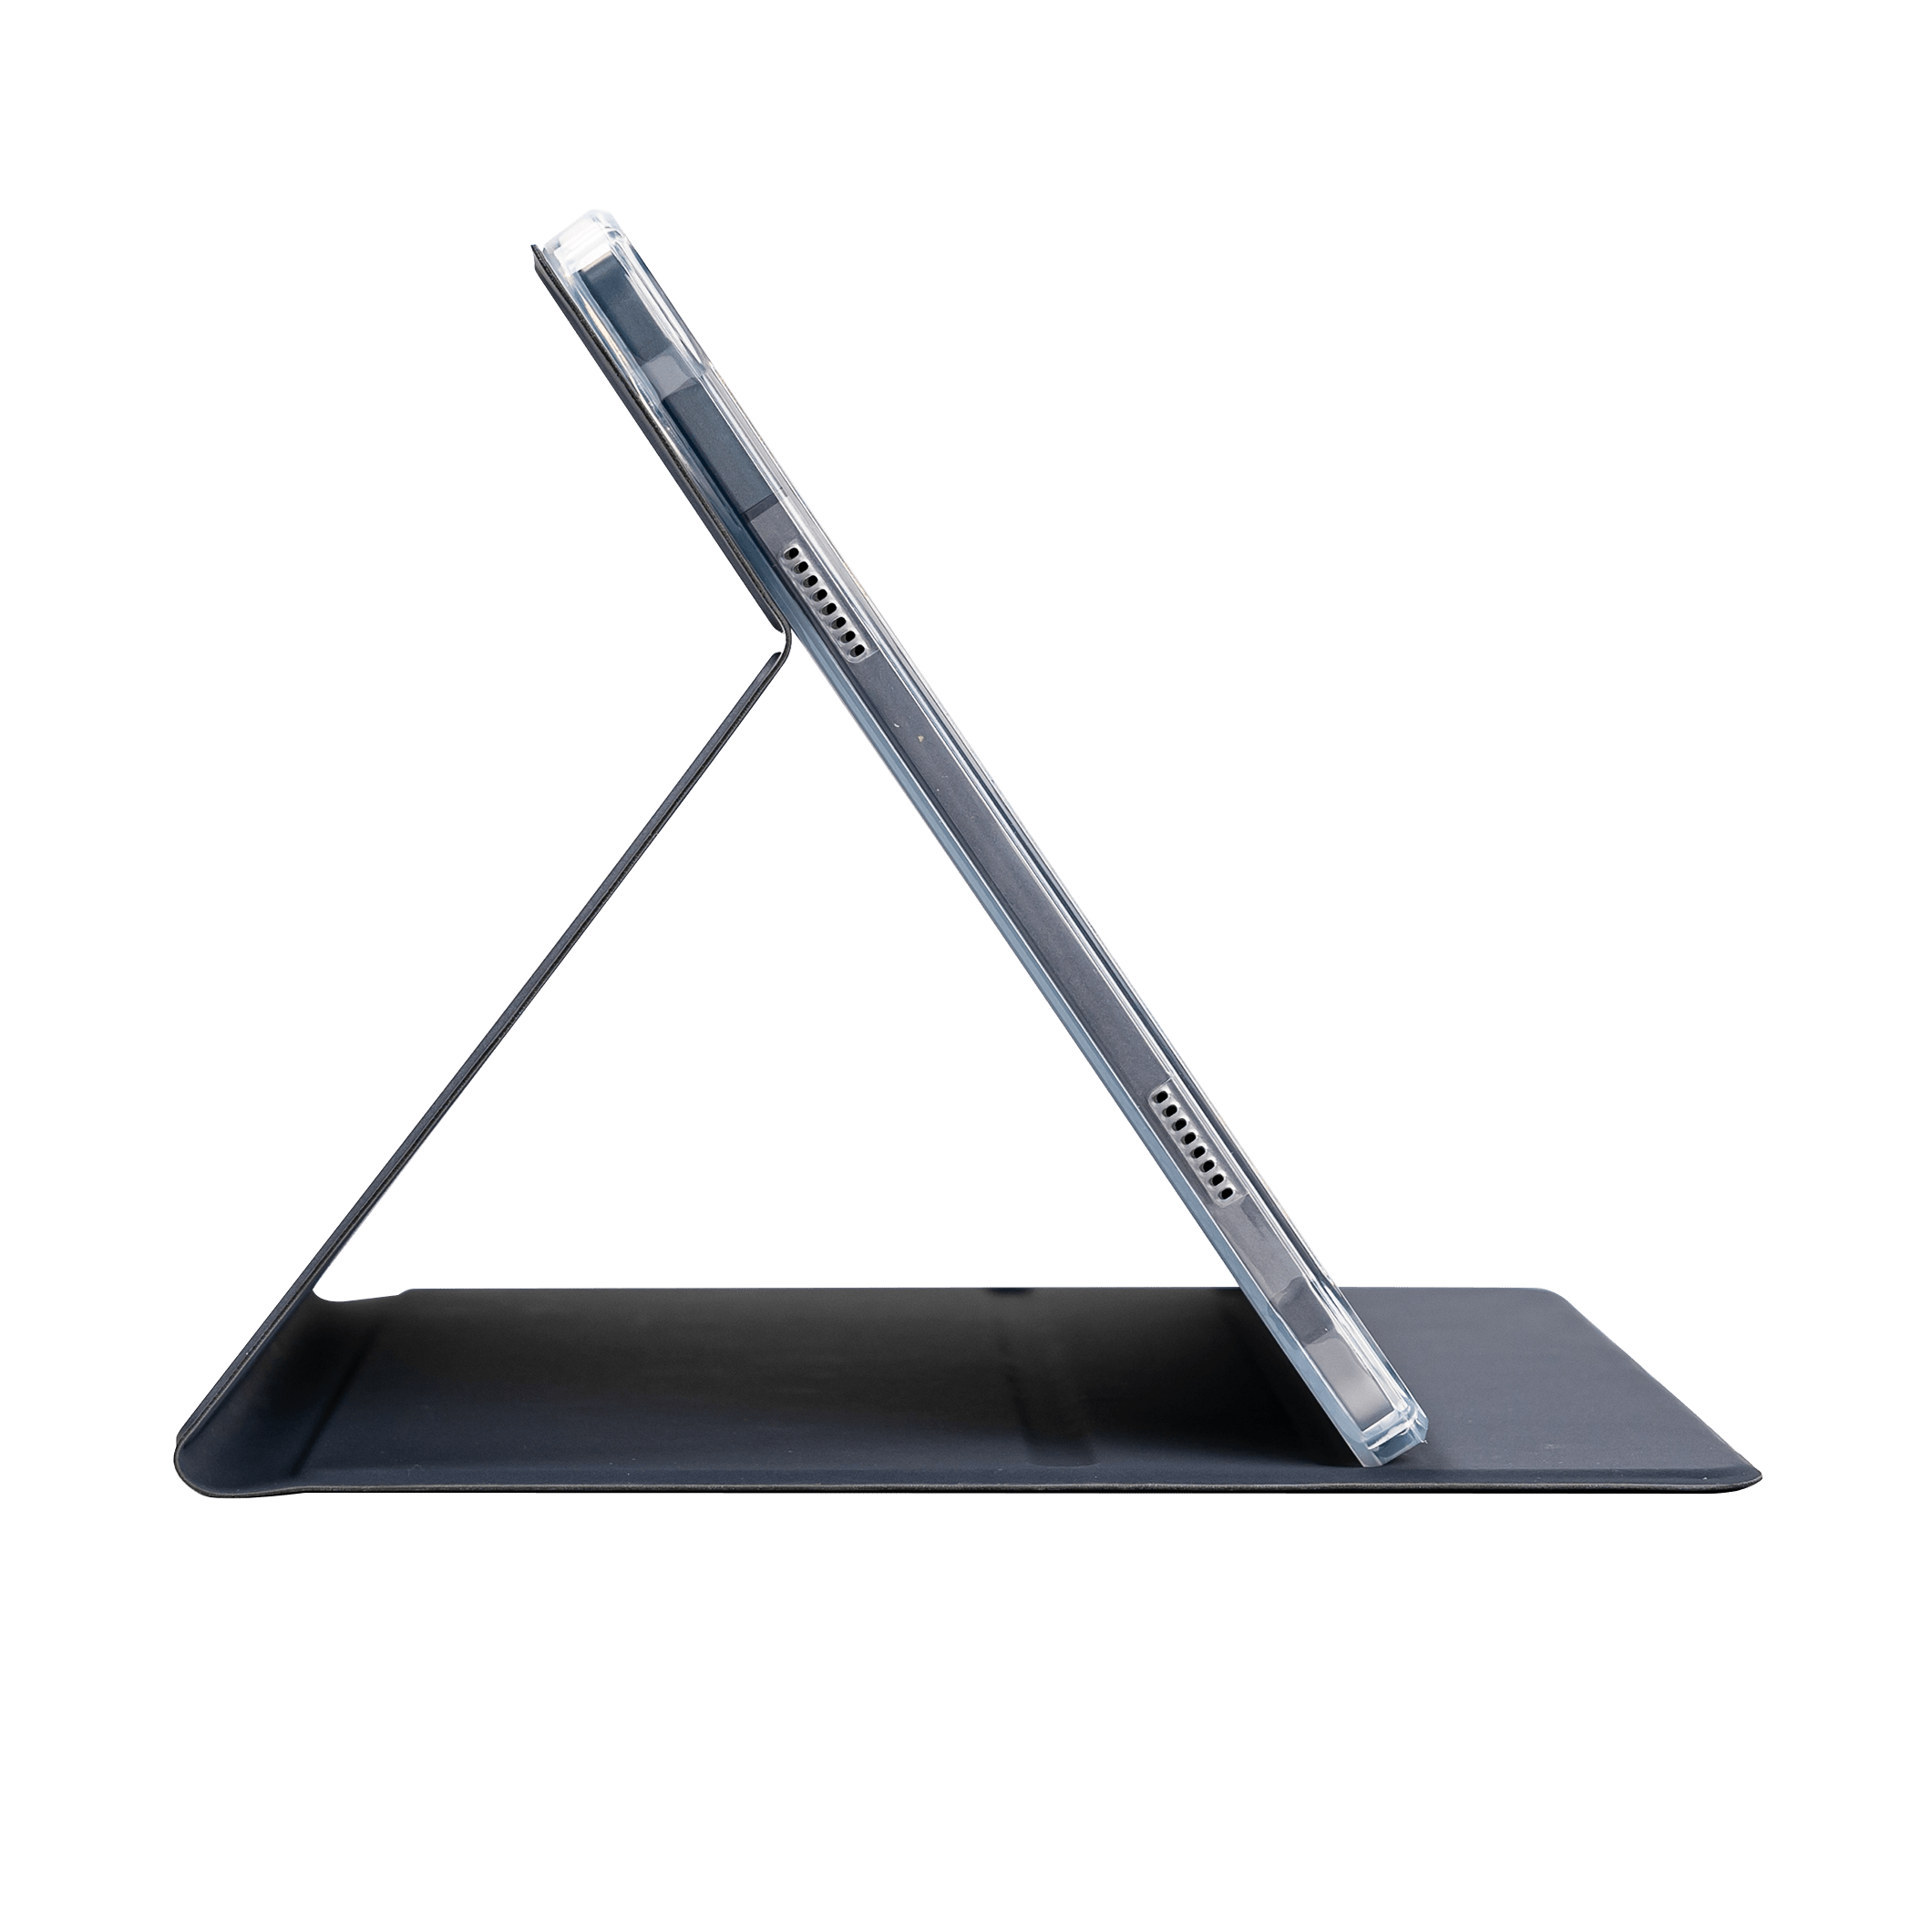 Durable and protective folio case for T65 Max tablet, featuring a versatile stand function for comfortable viewing and typing angles, displayed in a well-lit setting.